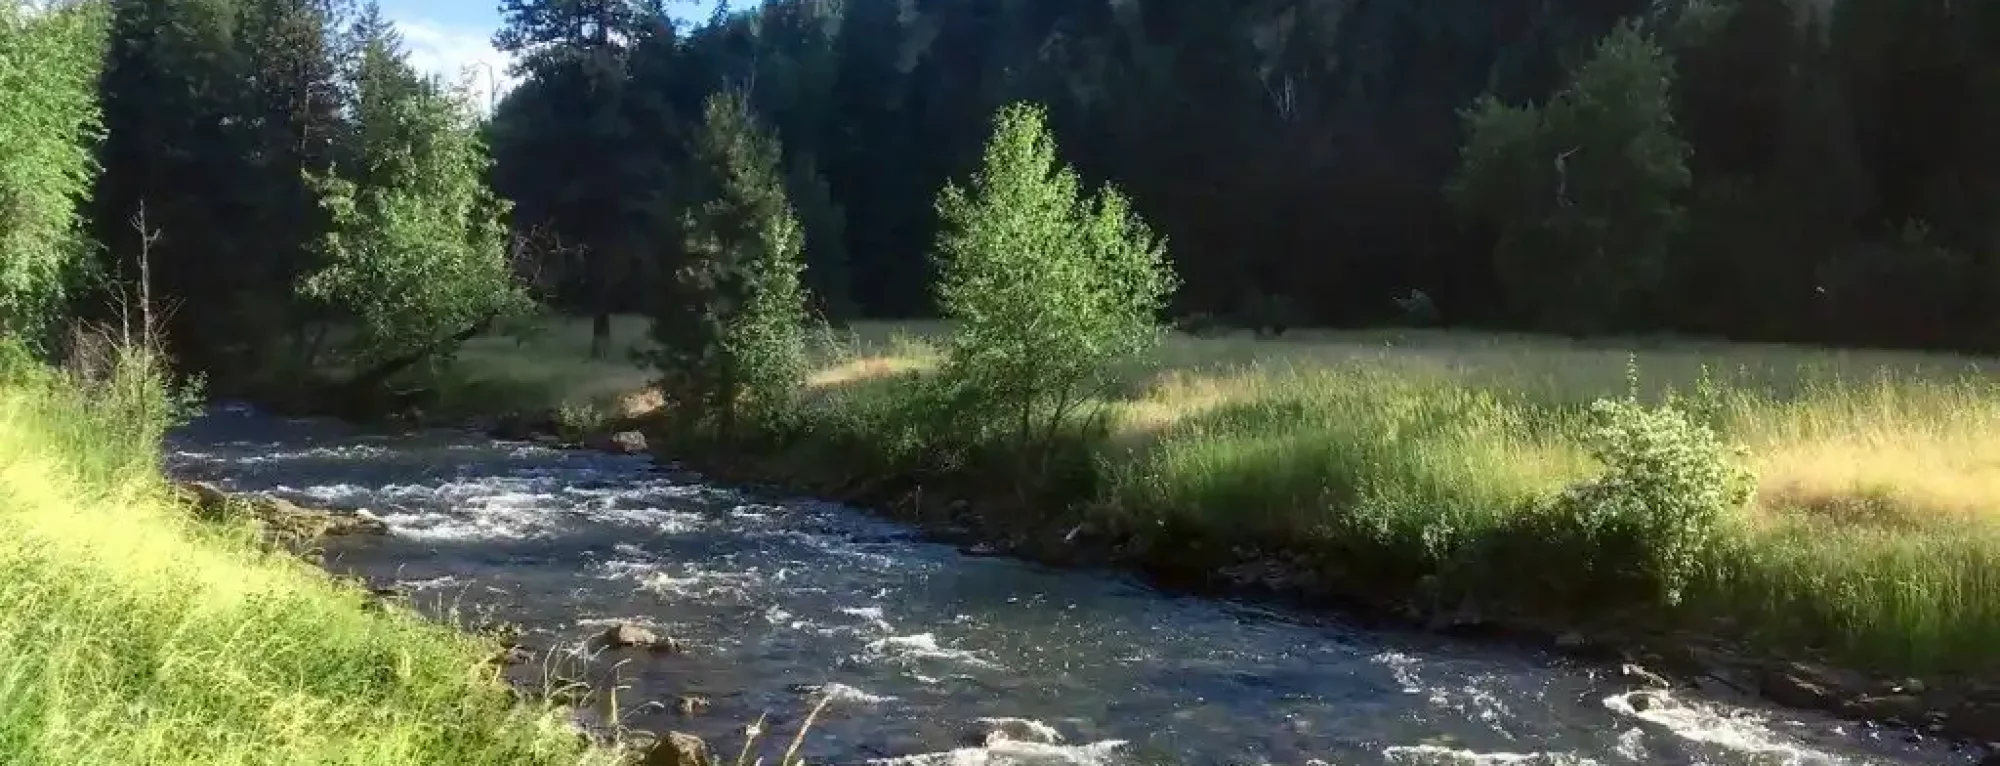 lostine-river-timber-tract-for-sale-wallowa-county-oregon